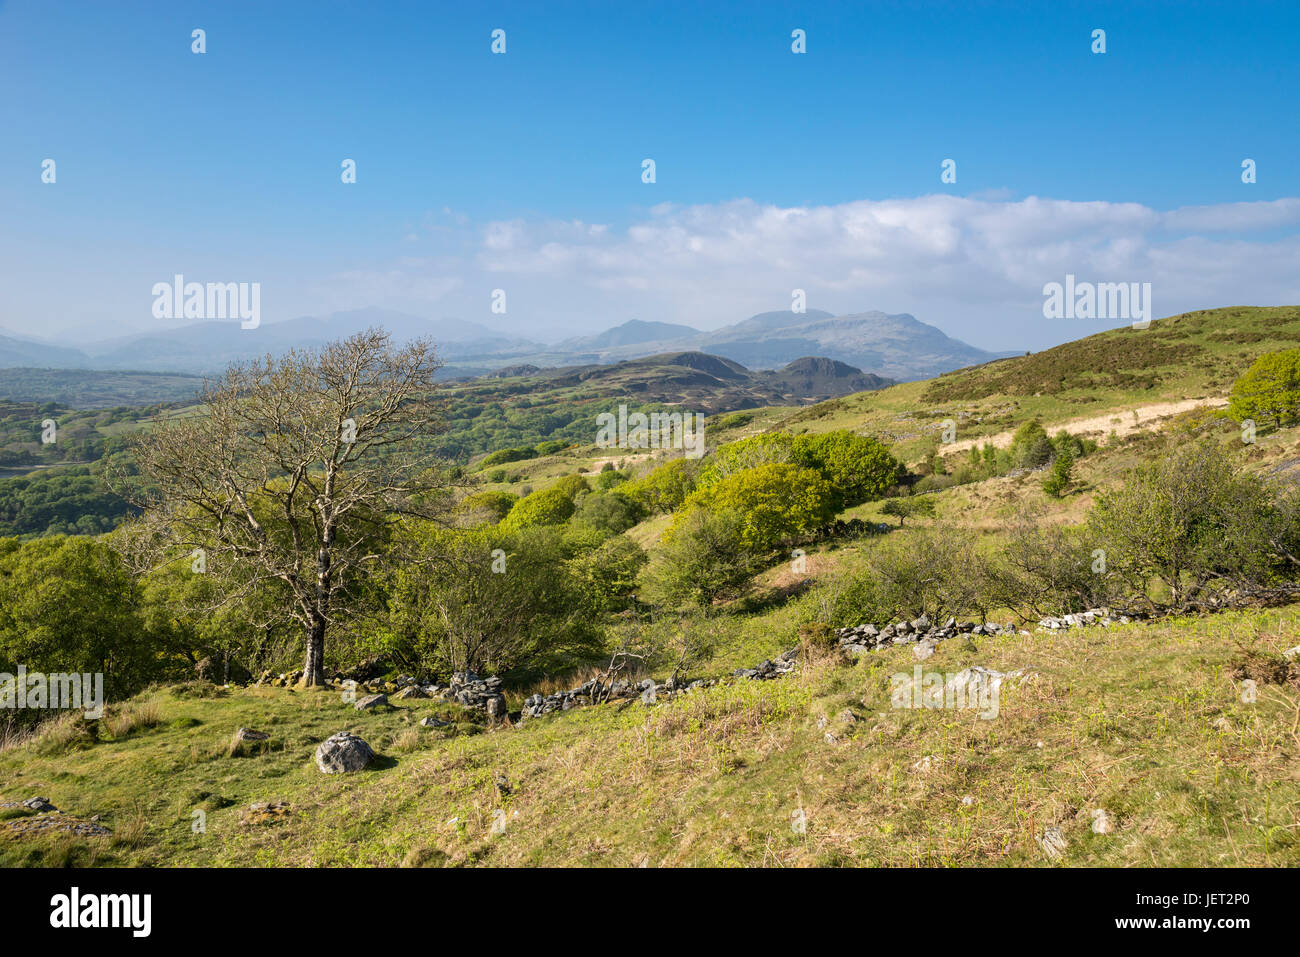 Beautiful scenery in the hills near Harlech in Snowdonia national park, North Wales. Stock Photo